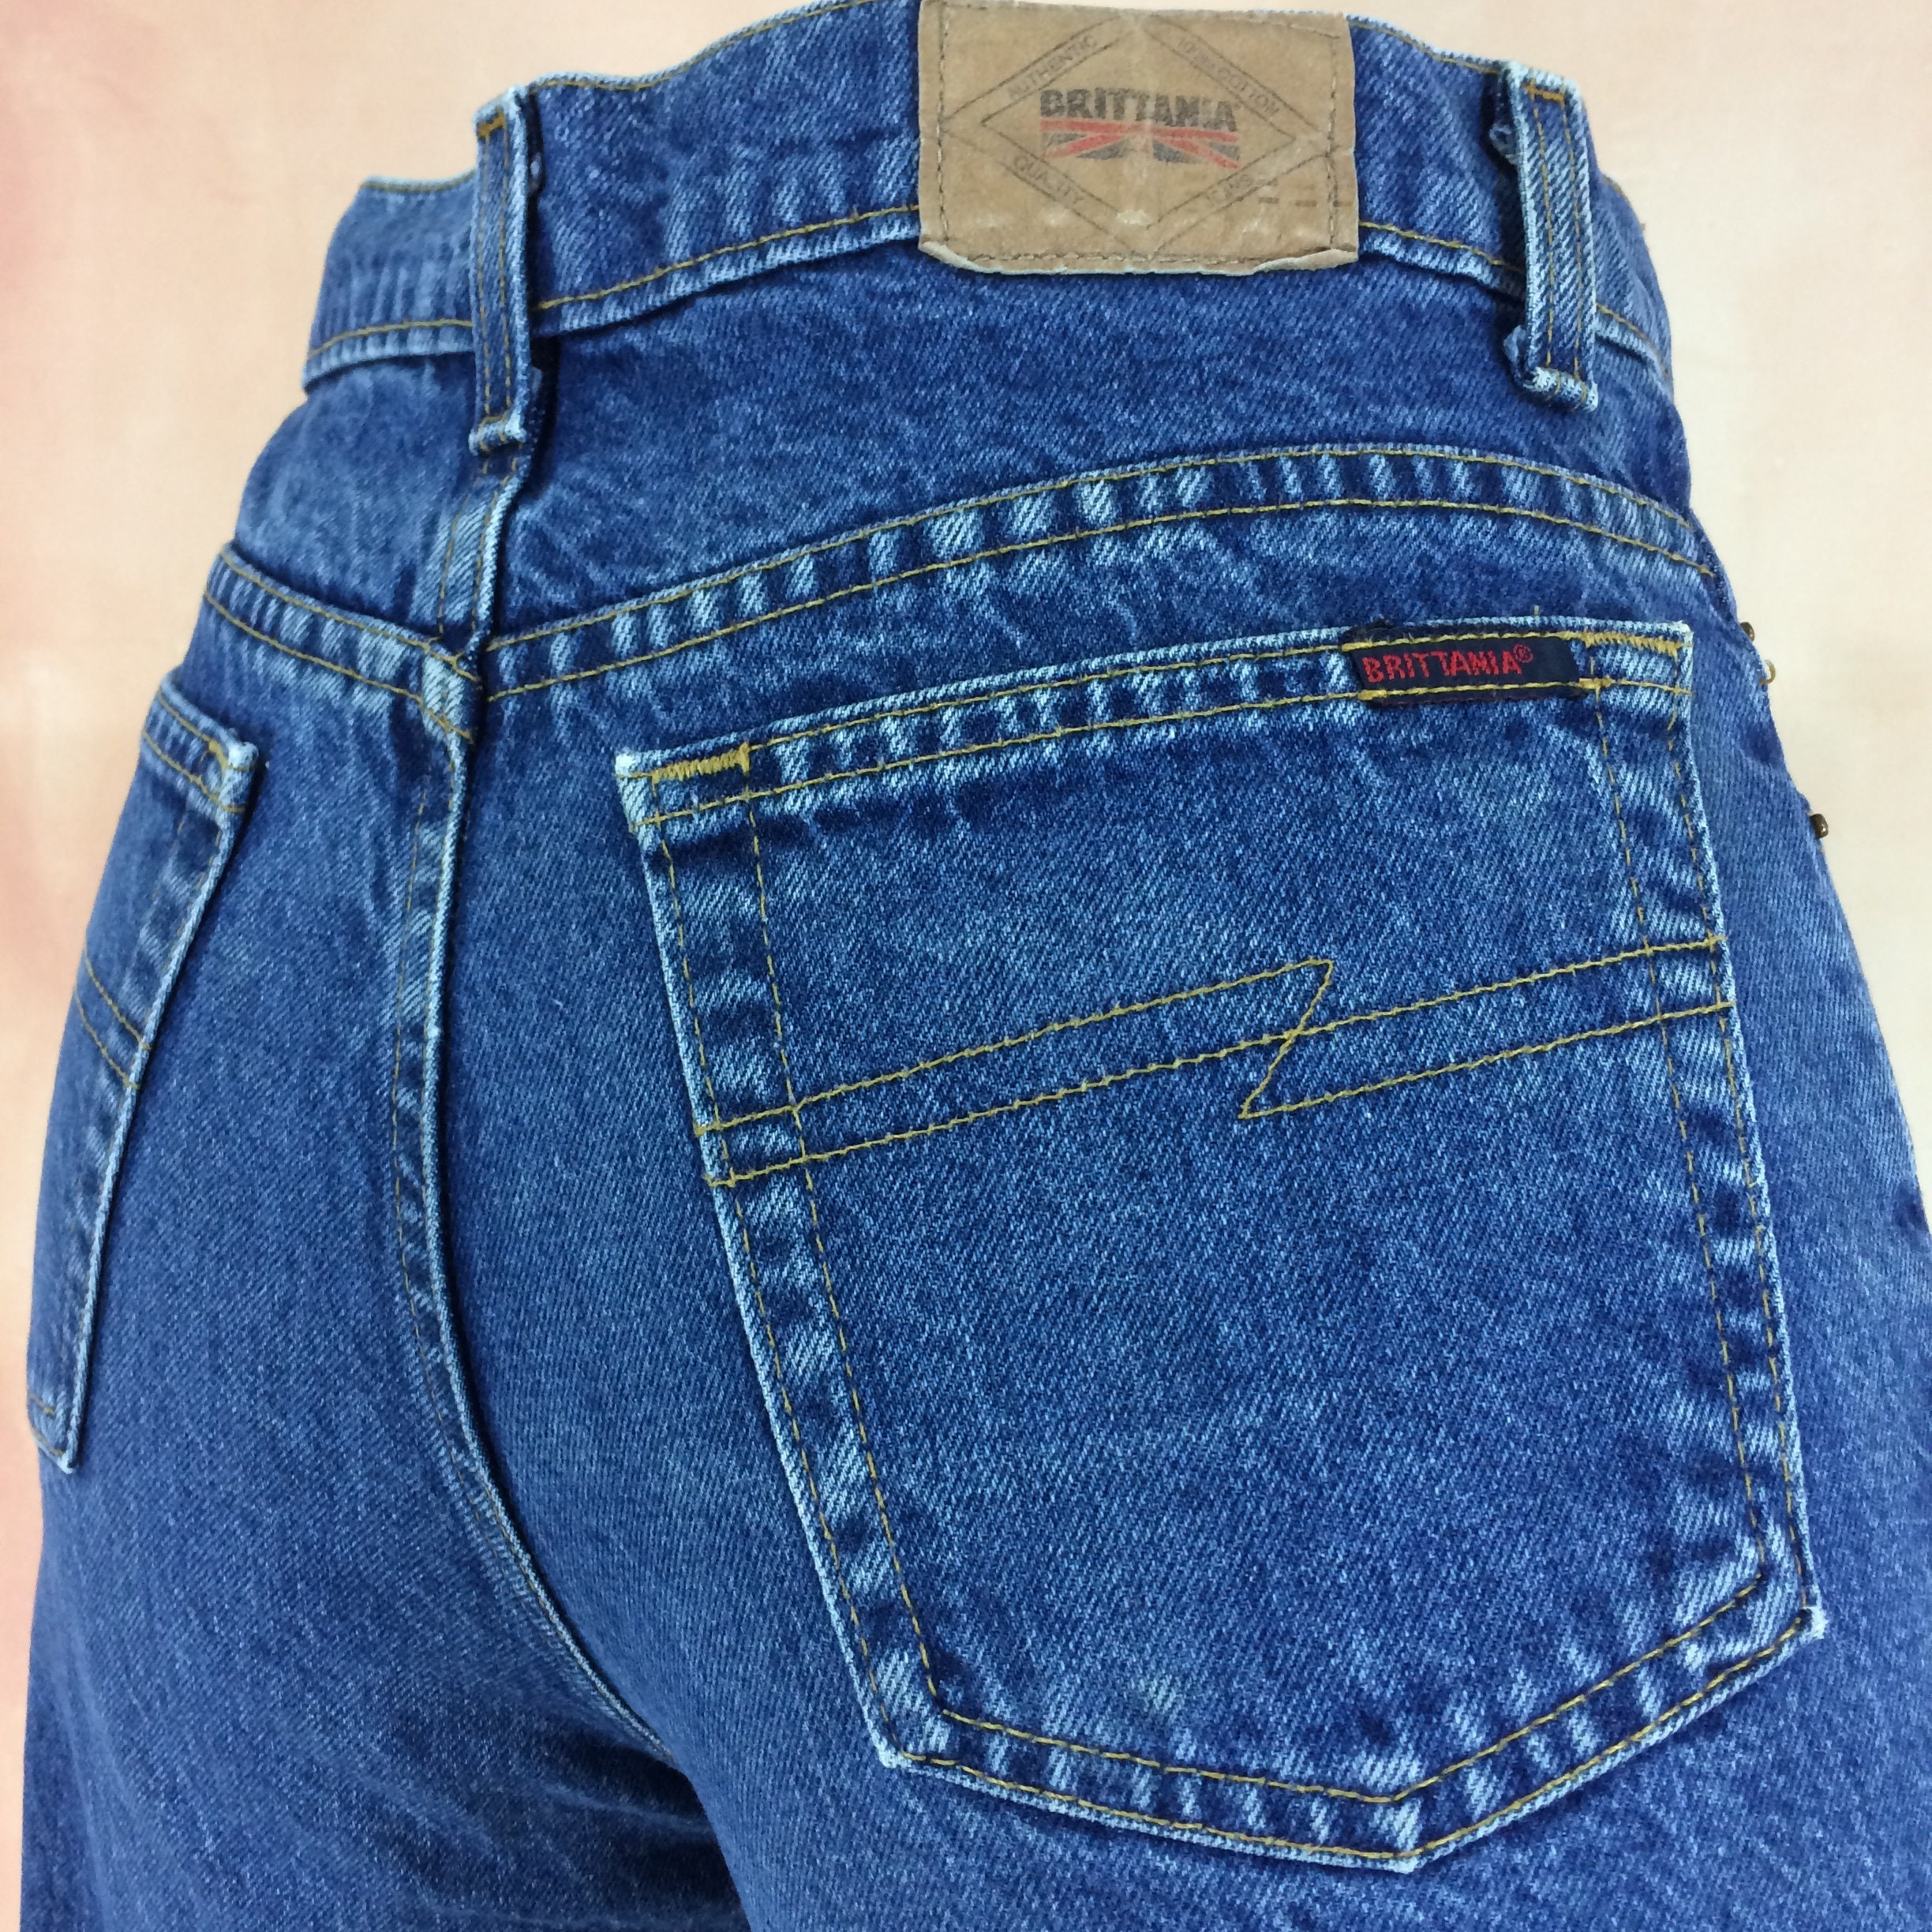 Size 29 Vintage Brittania Jeans W29 L29 High Waisted American - Etsy